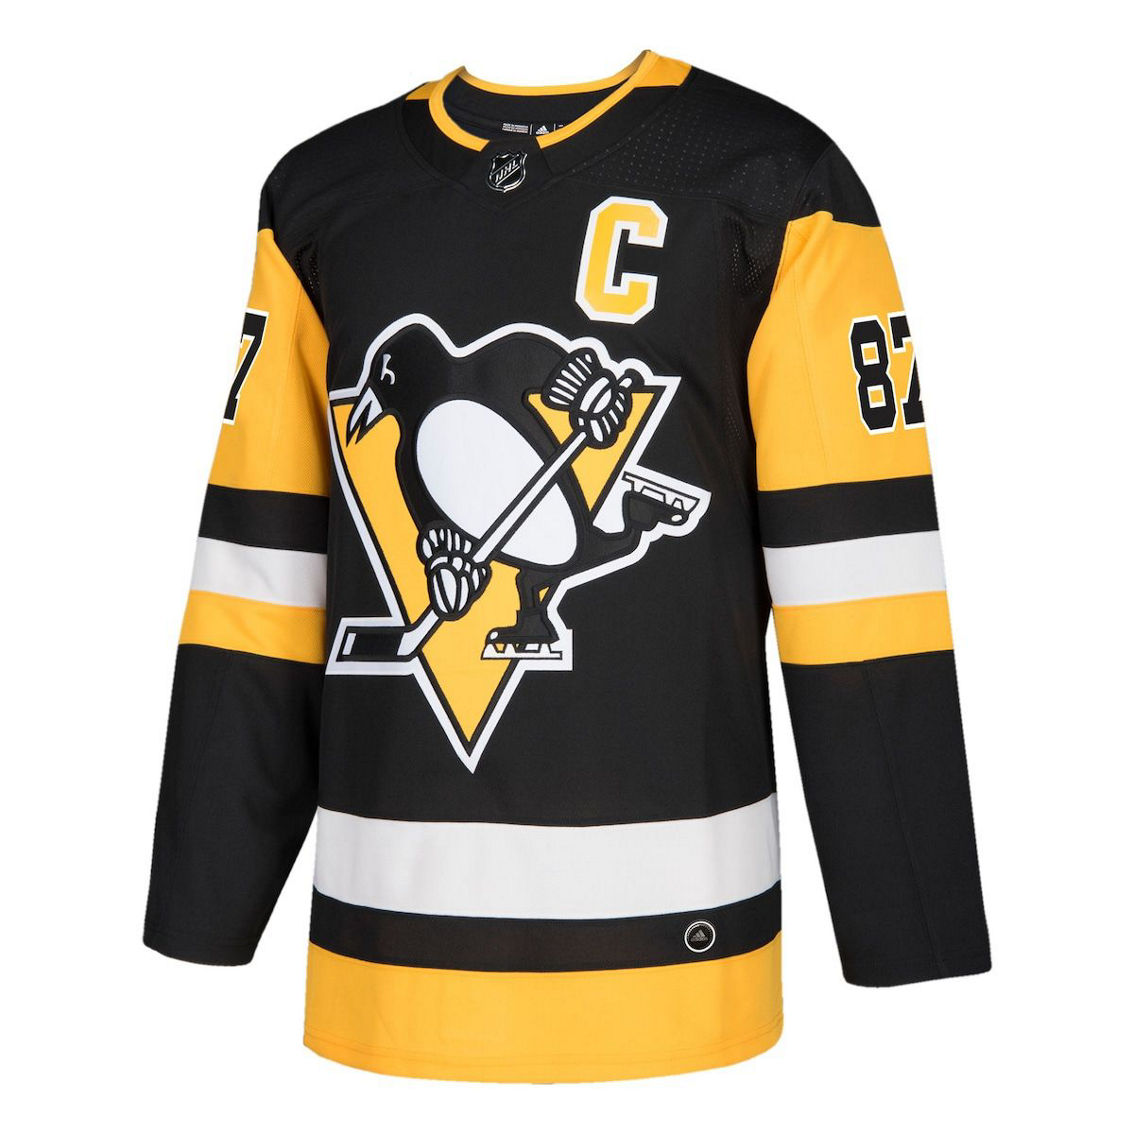 adidas Men's Sidney Crosby Black Pittsburgh Penguins Authentic Player Jersey - Image 3 of 4